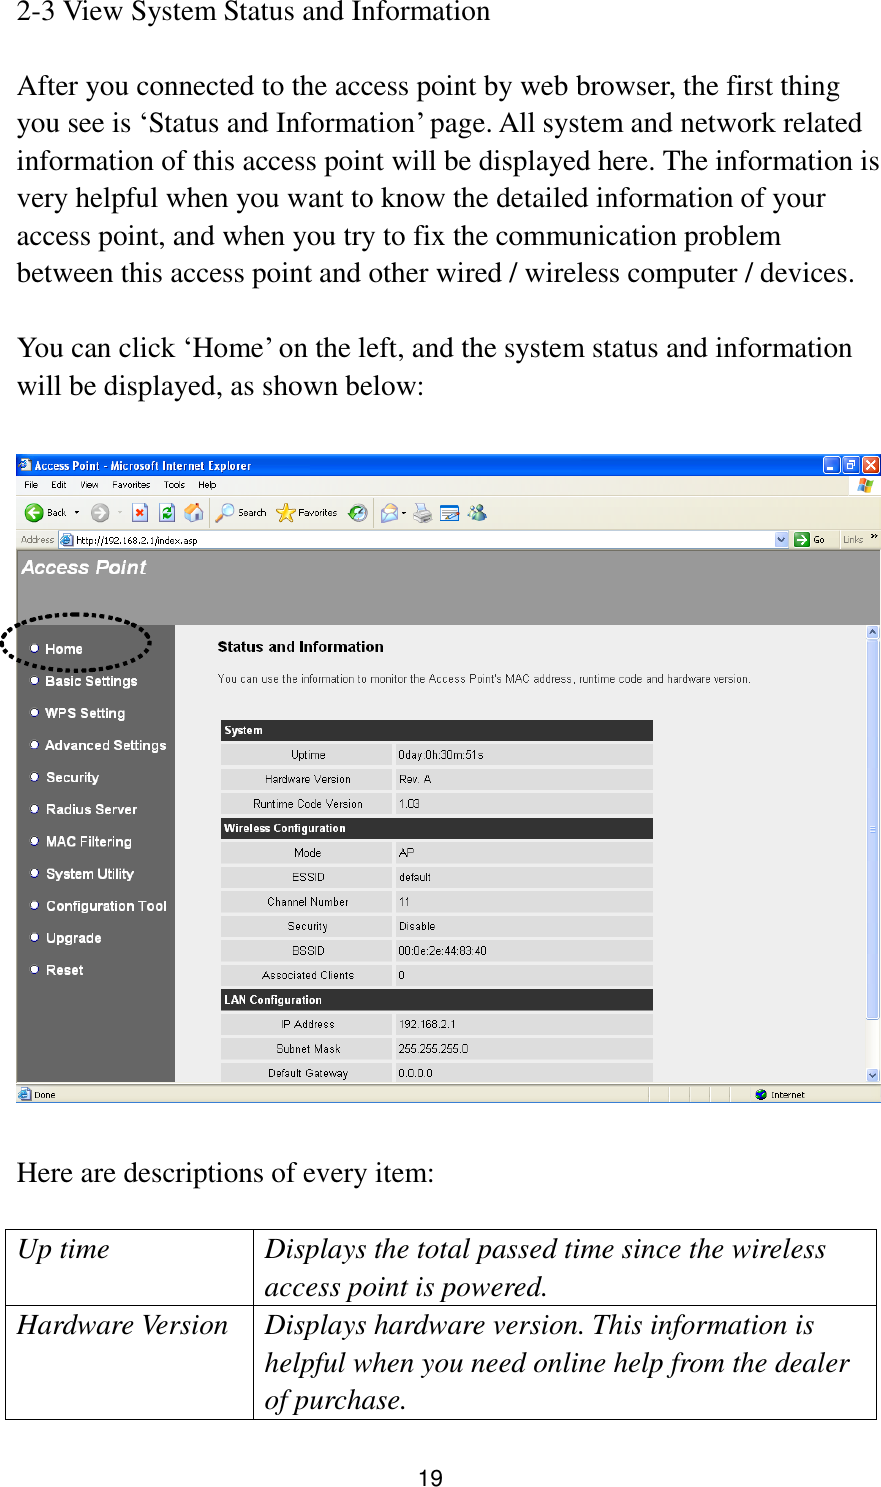 19 2-3 View System Status and Information  After you connected to the access point by web browser, the first thing you see is „Status and Information‟ page. All system and network related information of this access point will be displayed here. The information is very helpful when you want to know the detailed information of your access point, and when you try to fix the communication problem between this access point and other wired / wireless computer / devices.  You can click „Home‟ on the left, and the system status and information will be displayed, as shown below:    Here are descriptions of every item:  Up time Displays the total passed time since the wireless access point is powered. Hardware Version Displays hardware version. This information is helpful when you need online help from the dealer of purchase. 